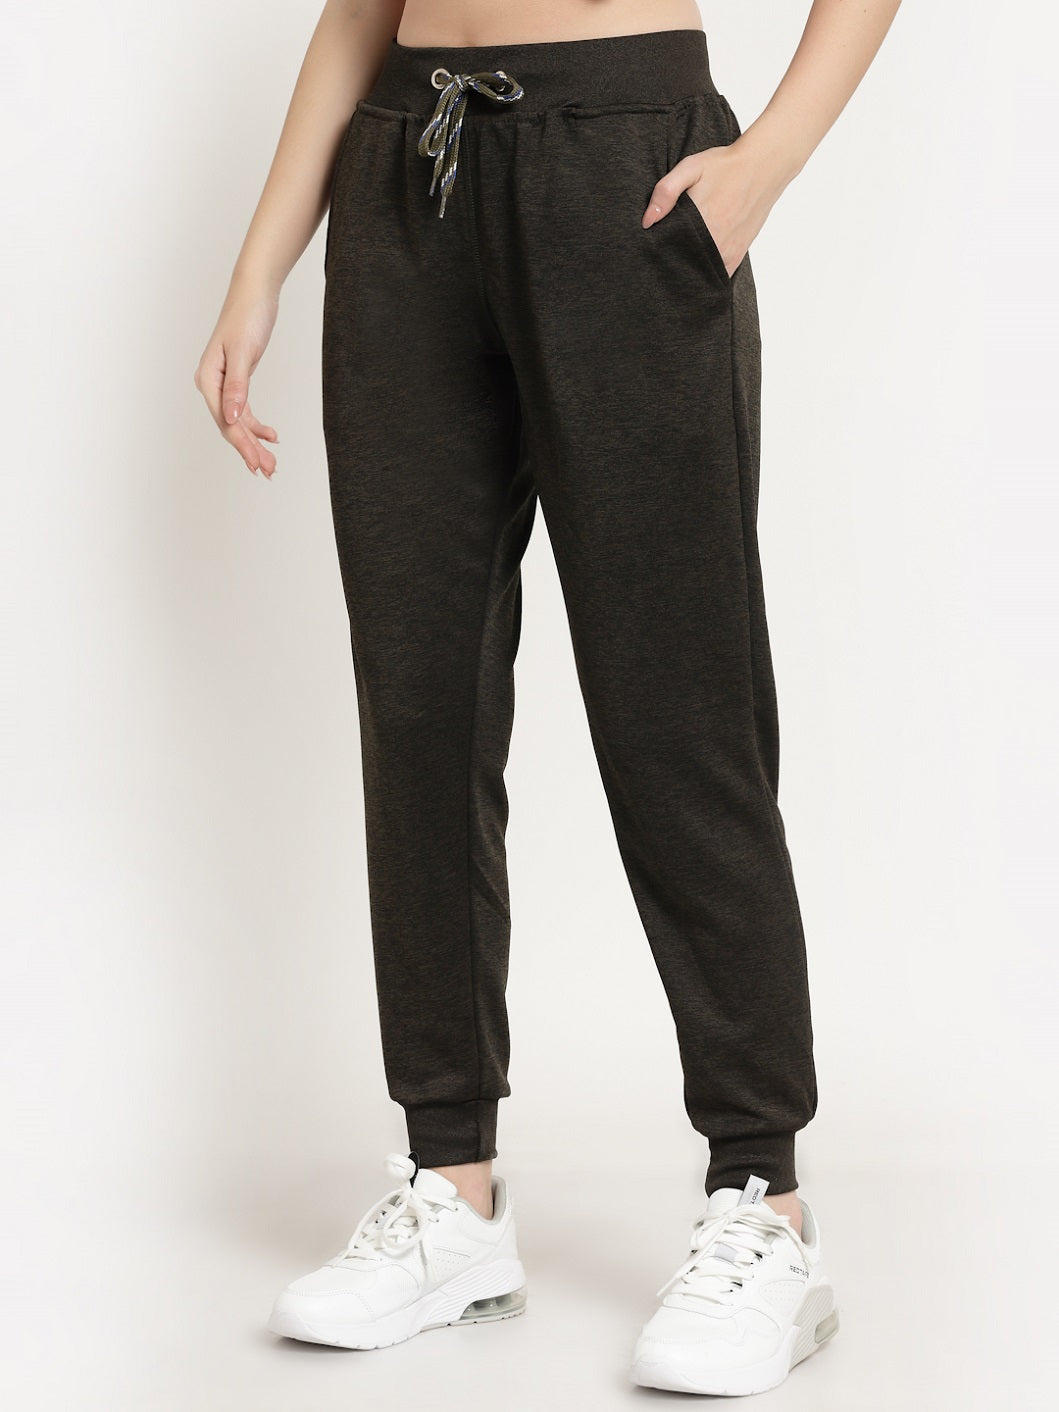 UZARUS Women's Joggers Track Pants with Zippered Pocket for Gym, Yoga, Workout and Casual Wear